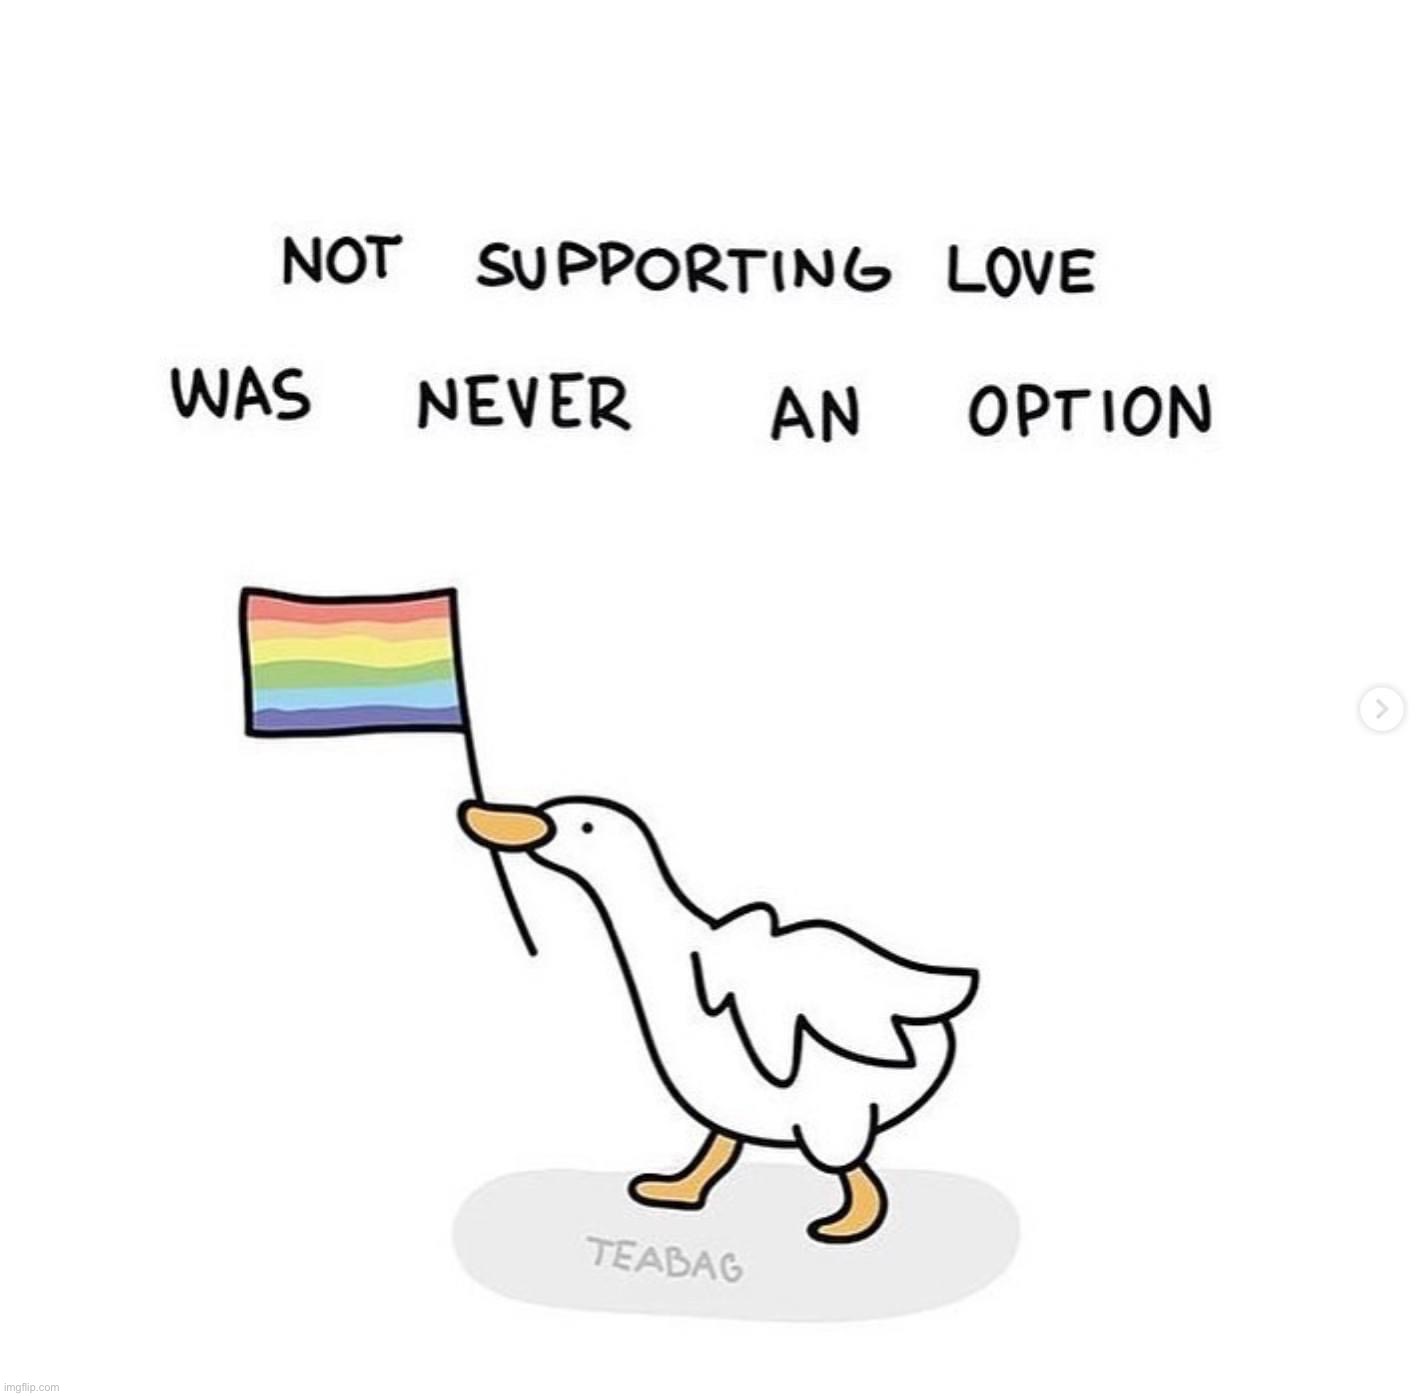 Not supporting love was never an option | image tagged in not supporting love was never an option,untitled goose peace was never an option,goose,lgbtq,lgbt,equality | made w/ Imgflip meme maker